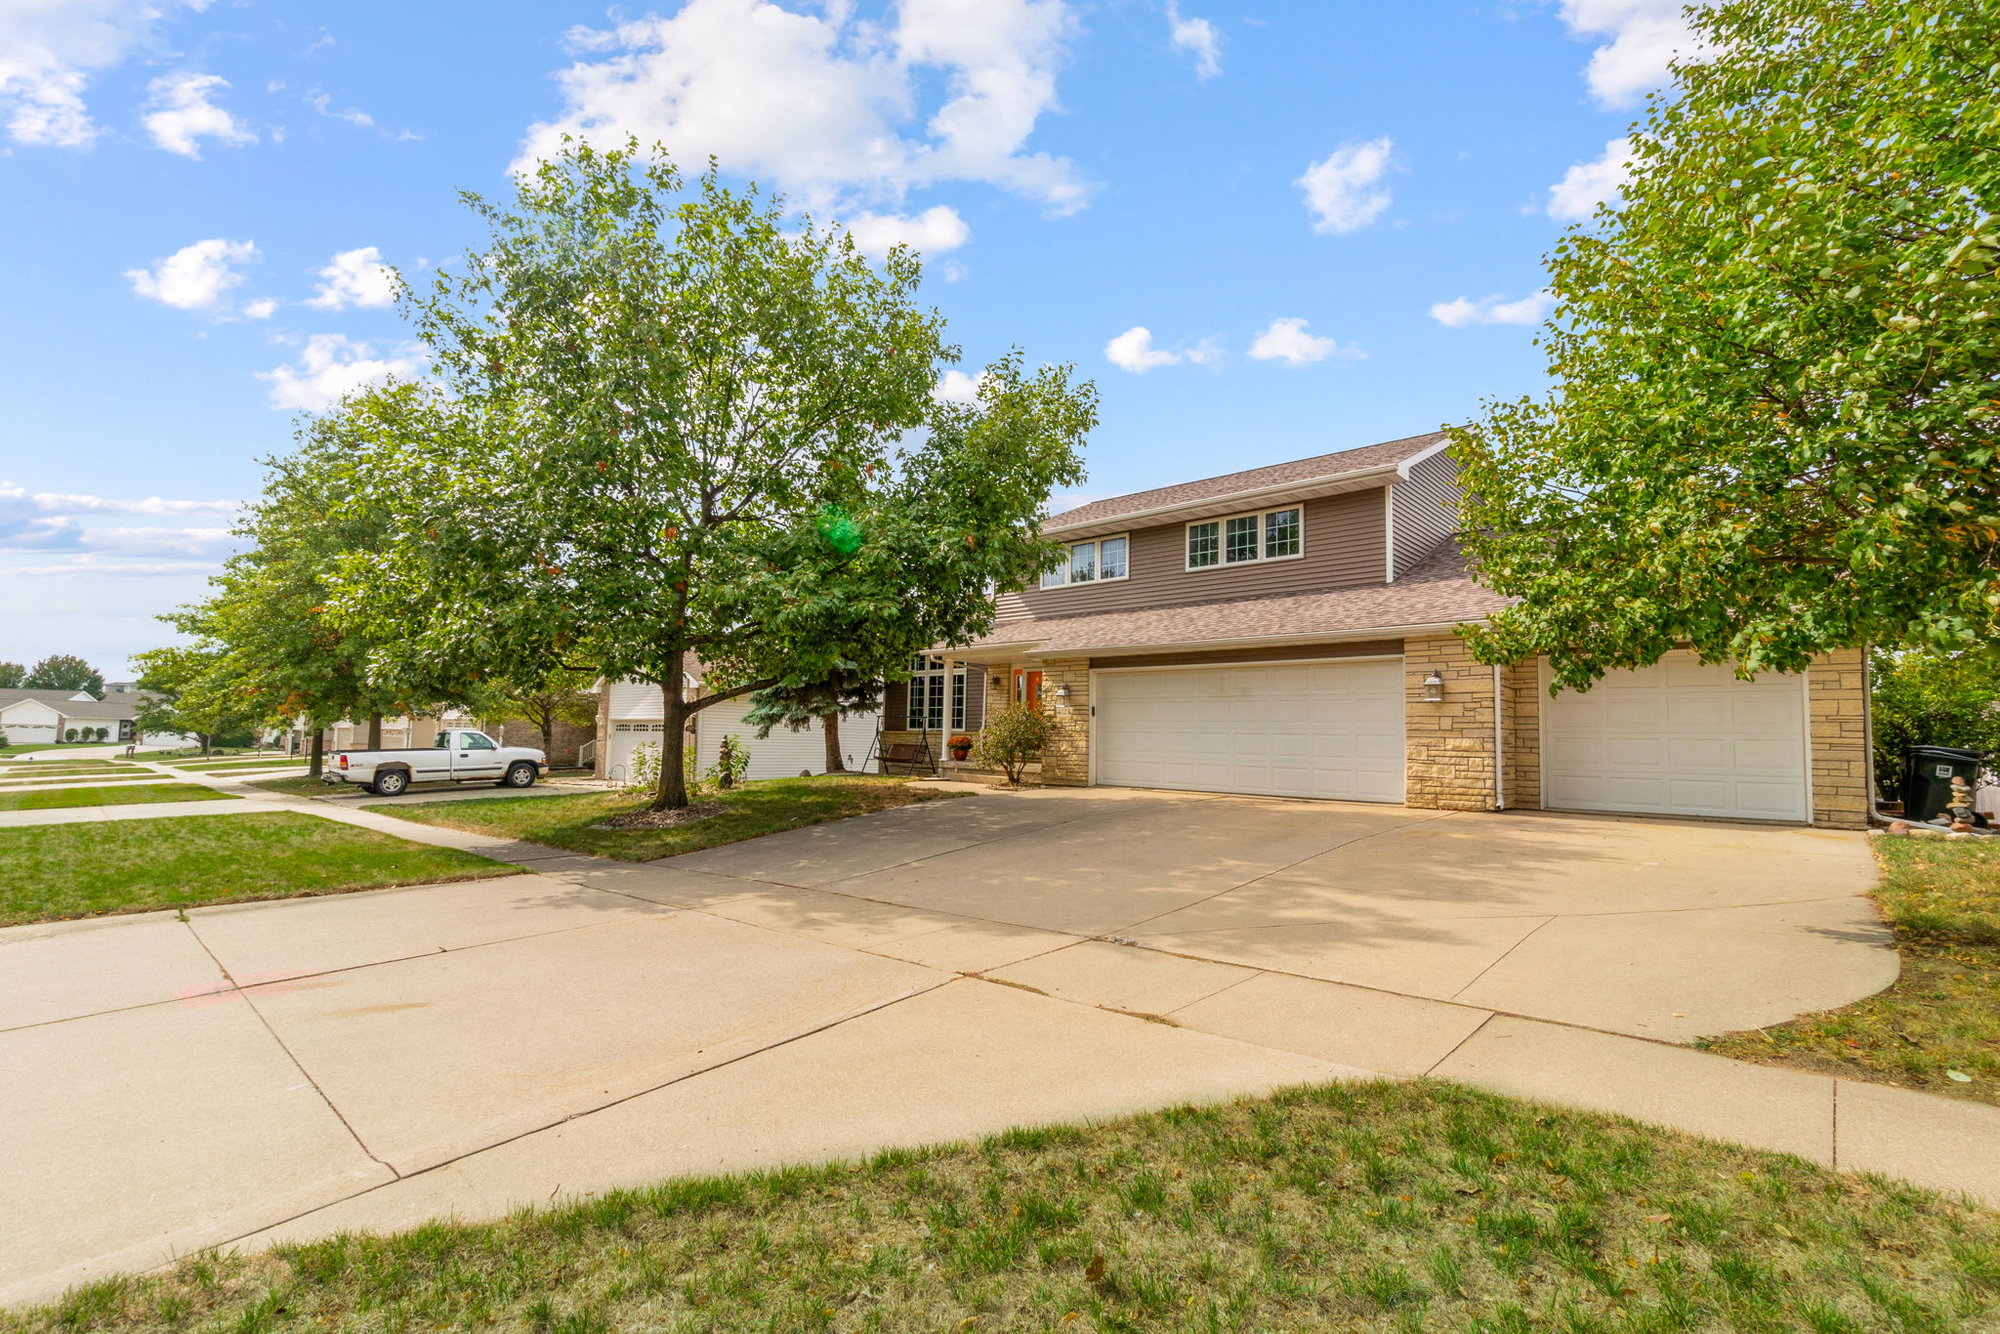 Check out the Nicely Updated and Well Maintained Two-Story Home in the Highly Desirable Briarwood Hills Neighborhood! 4123 Briarwood Dr., Cedar Falls